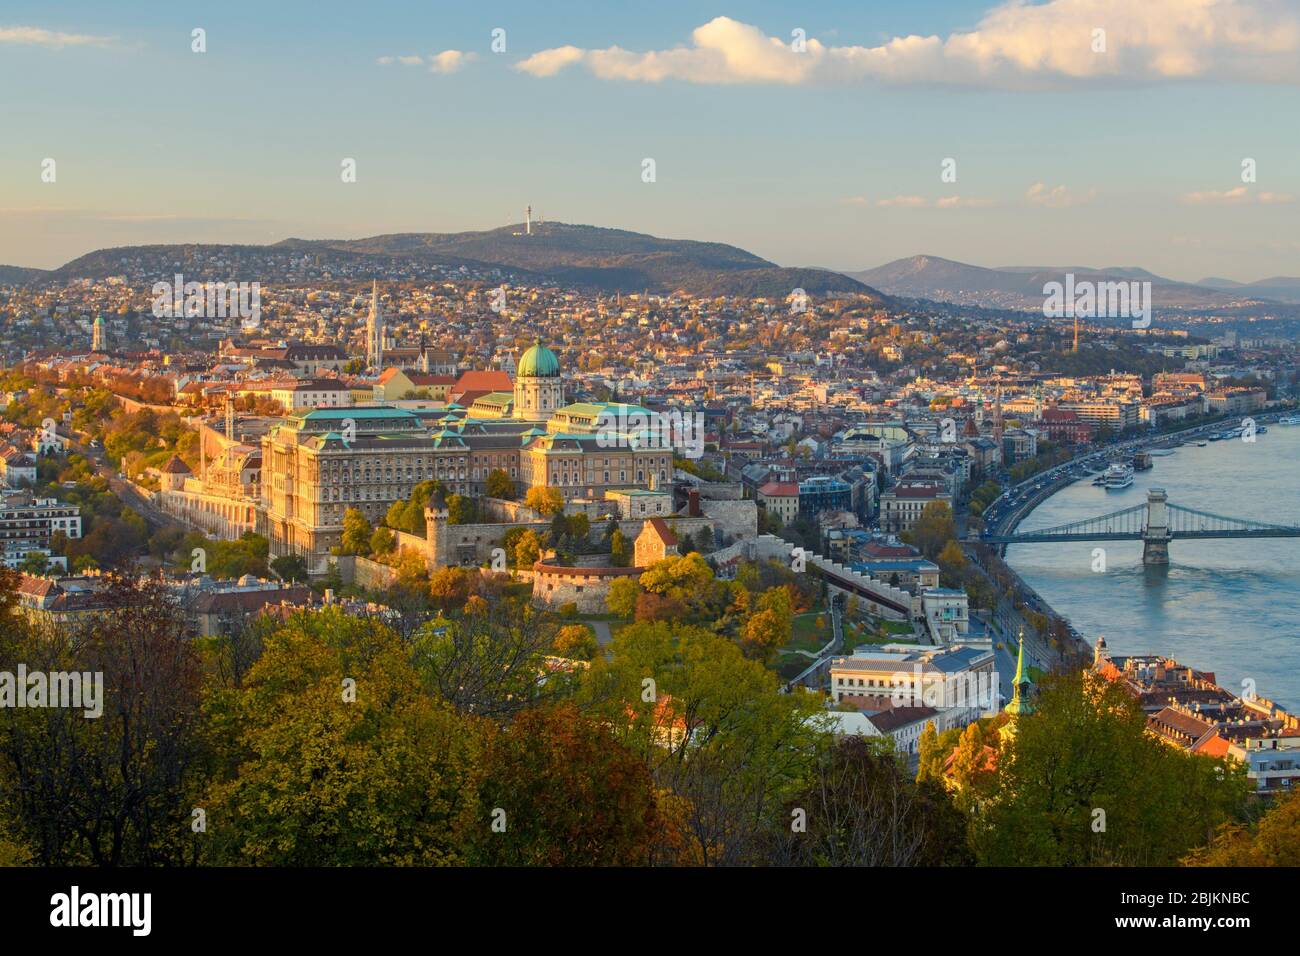 Views of Budapest from the Citadella- River Danube and Buda side in late afternoon, Budapest, Central Hungary, Hungary. Stock Photo